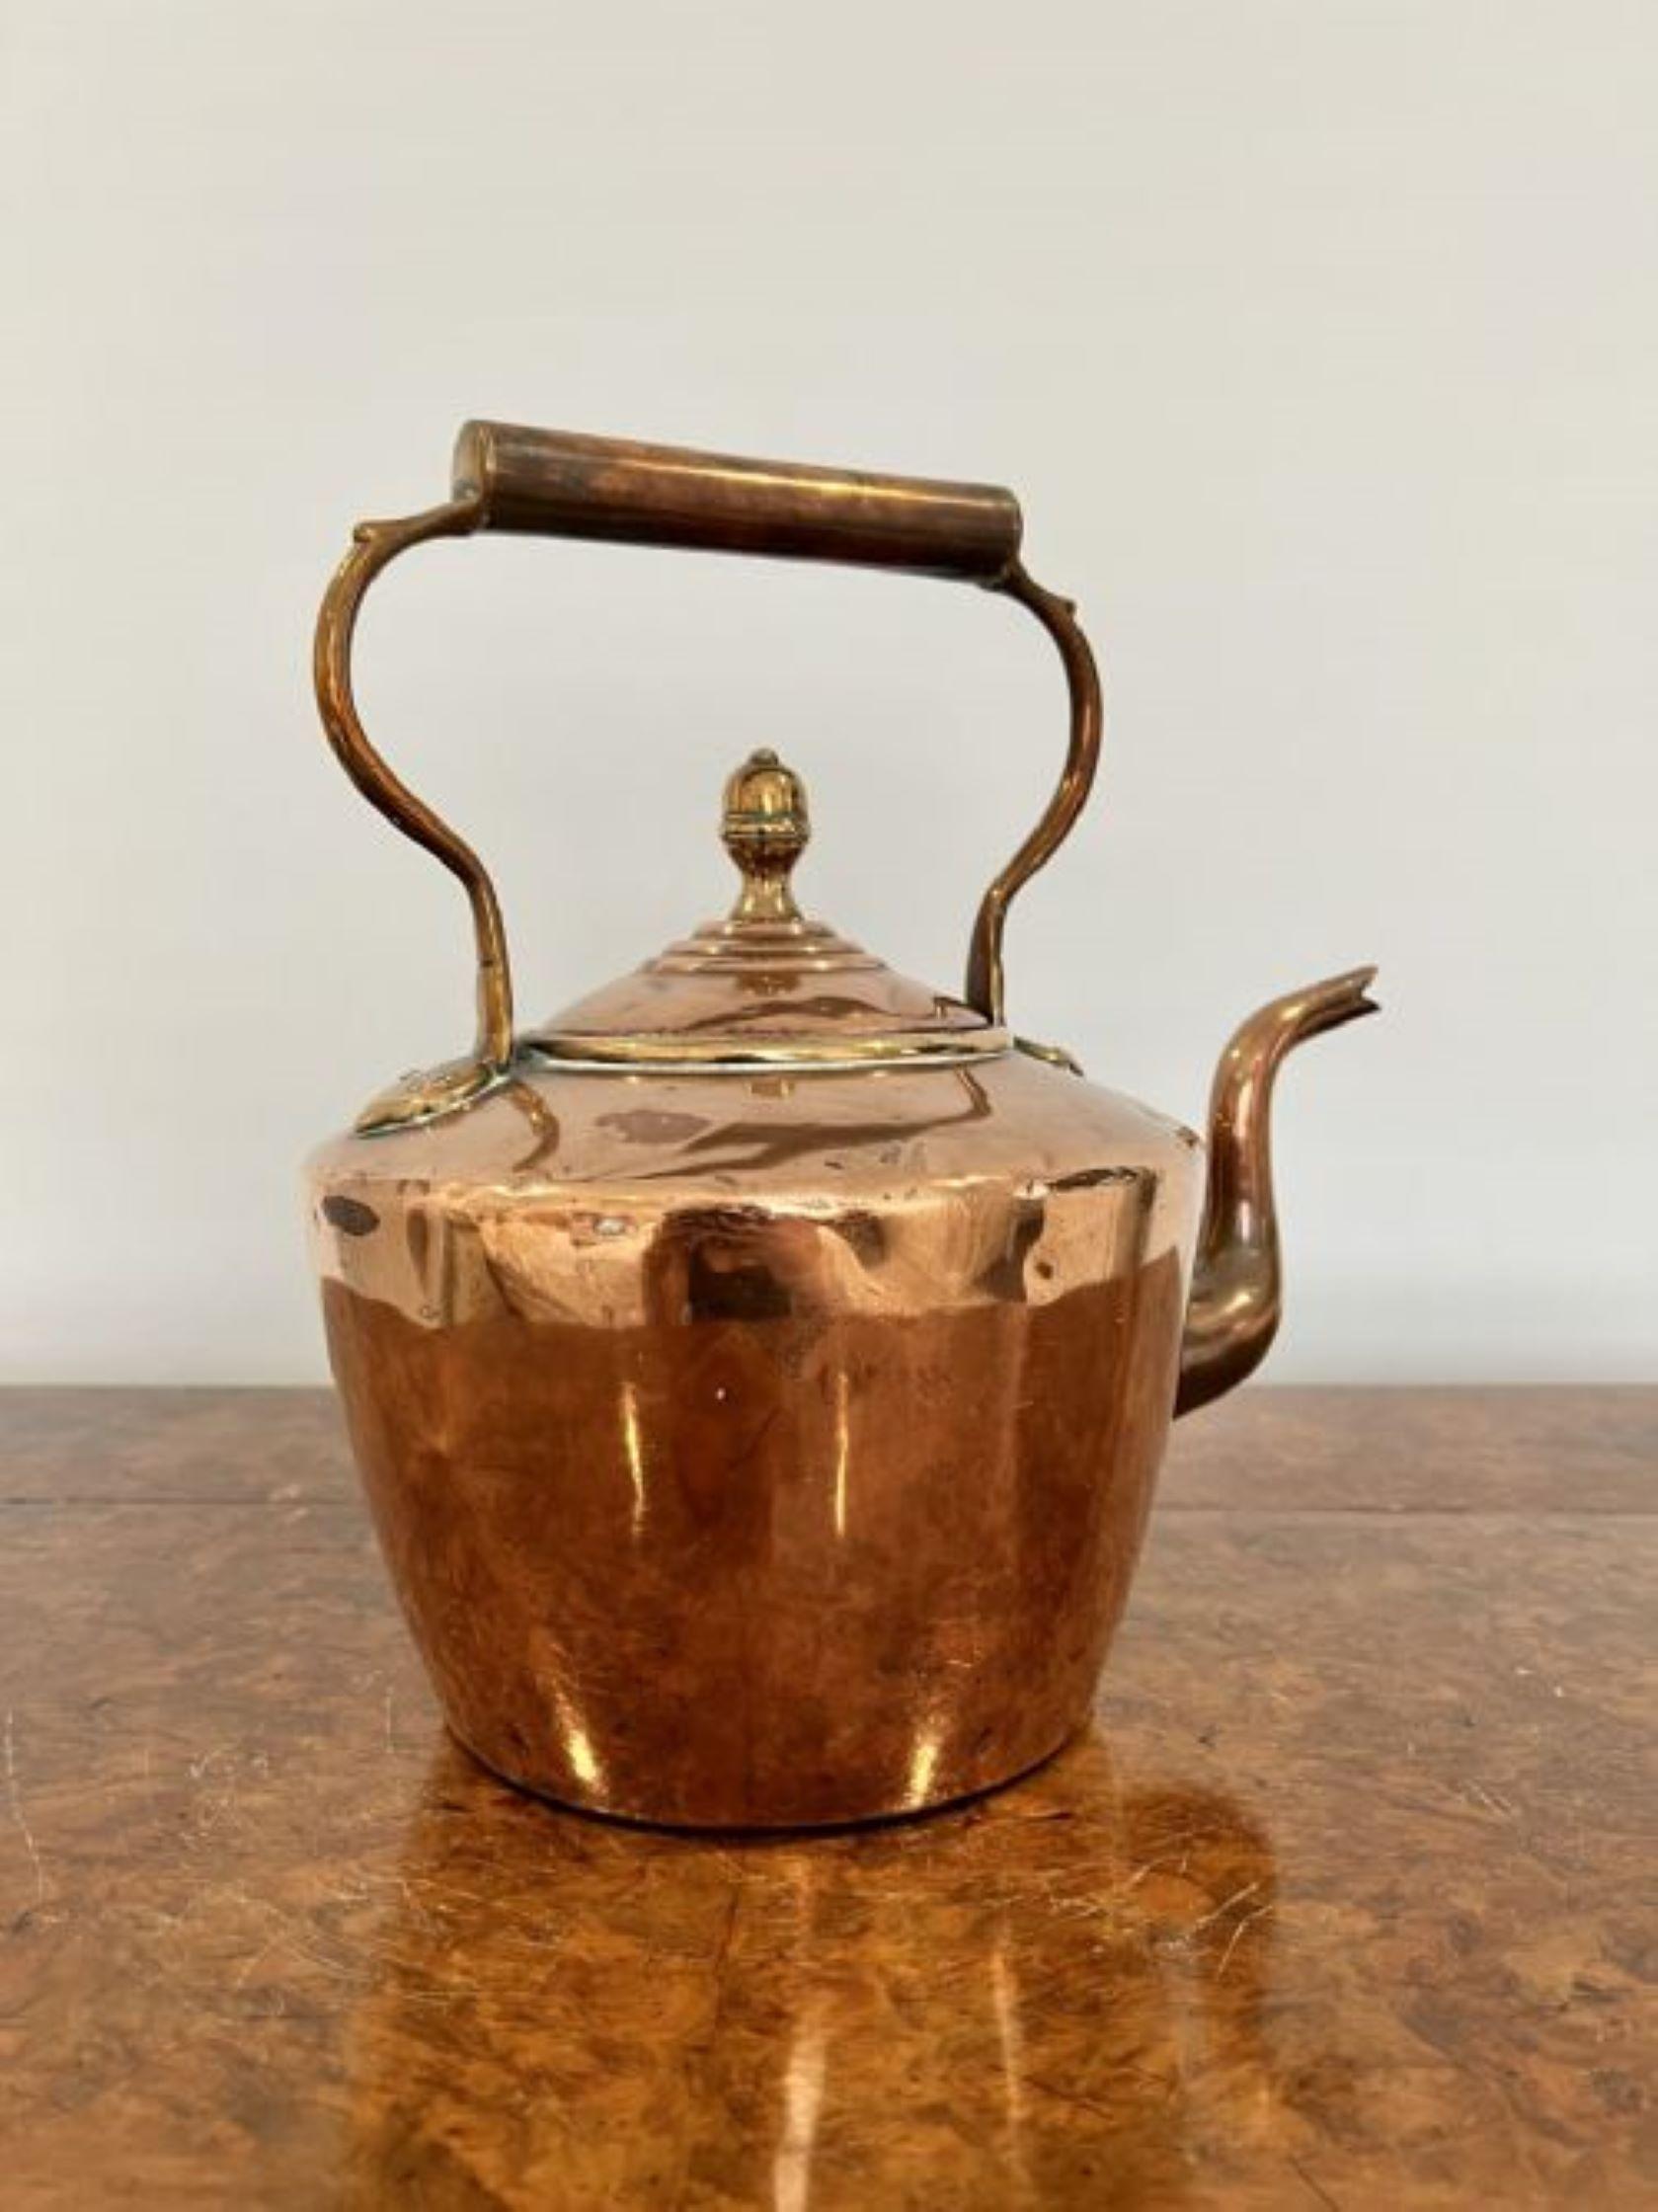 Antique George III copper kettle having a shaped handle and spout, lift off lid with original knob.